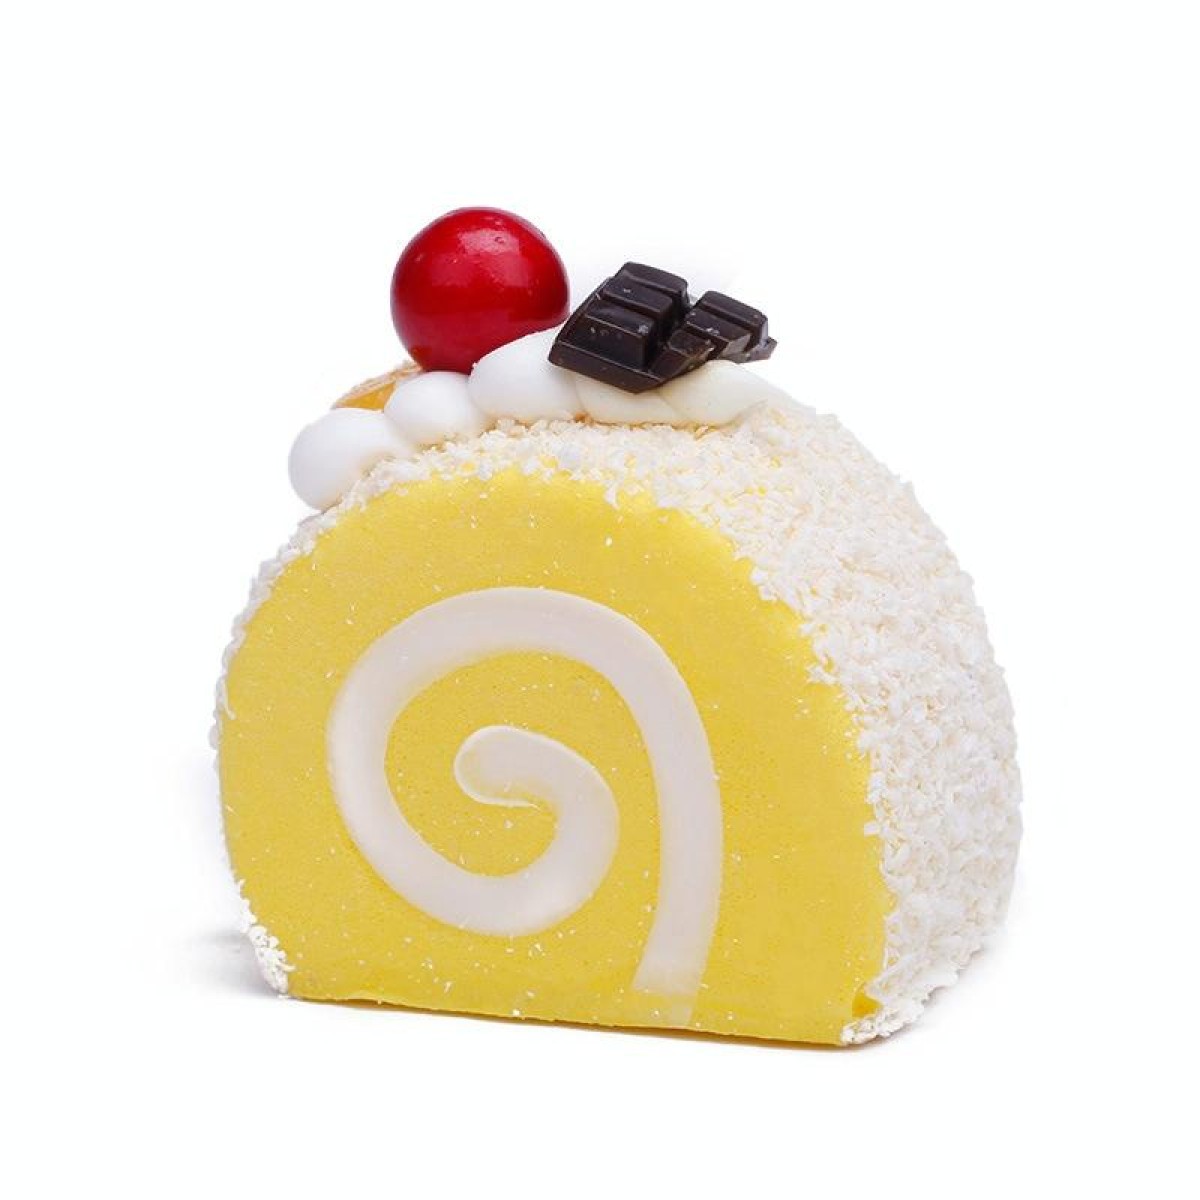 Simulation Egg Roll Cake Refrigerator Sticker Photography Props Decoration(Yellow With Powder)